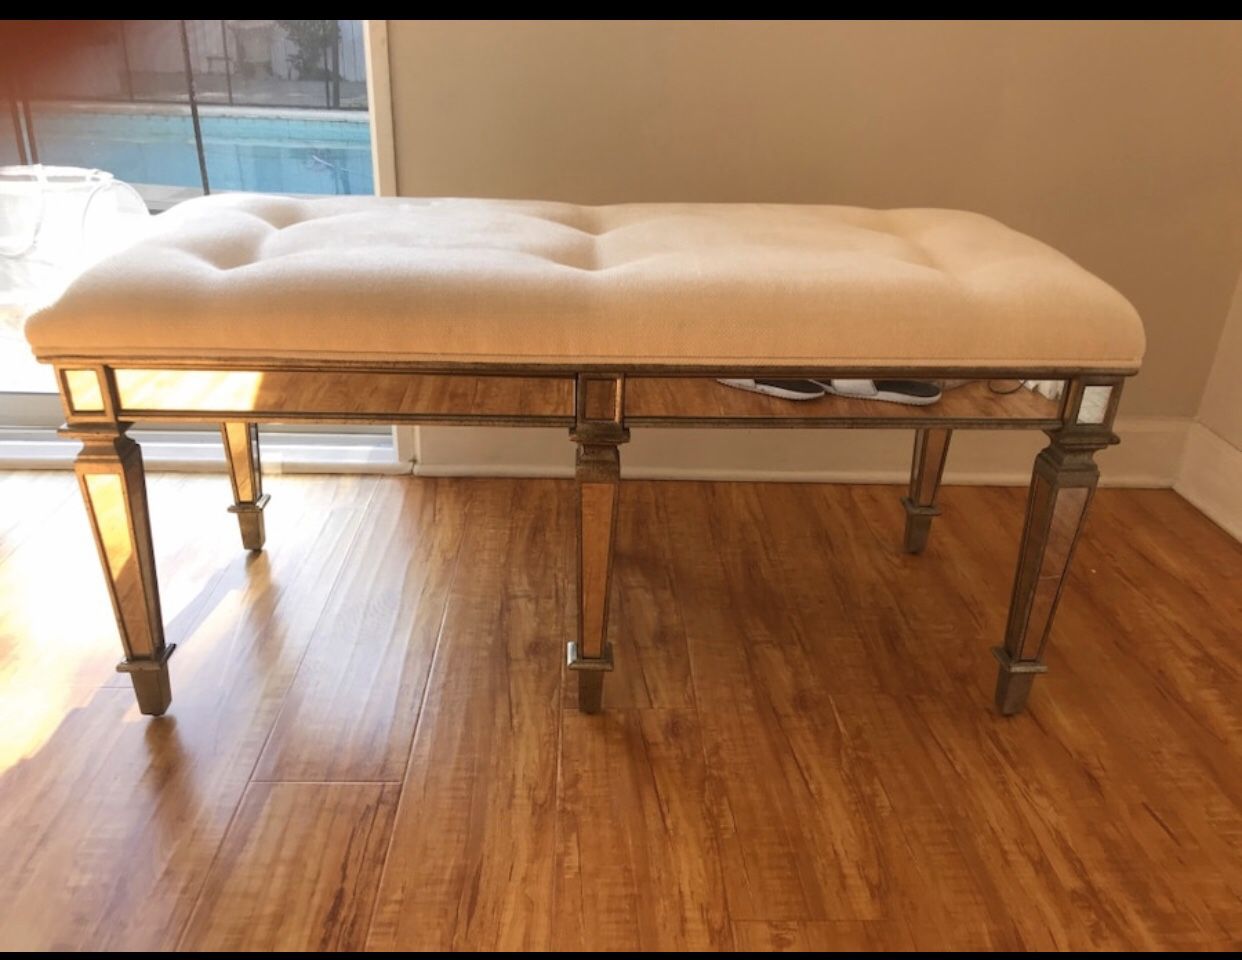 White / Mirrored bedroom bench - Like New